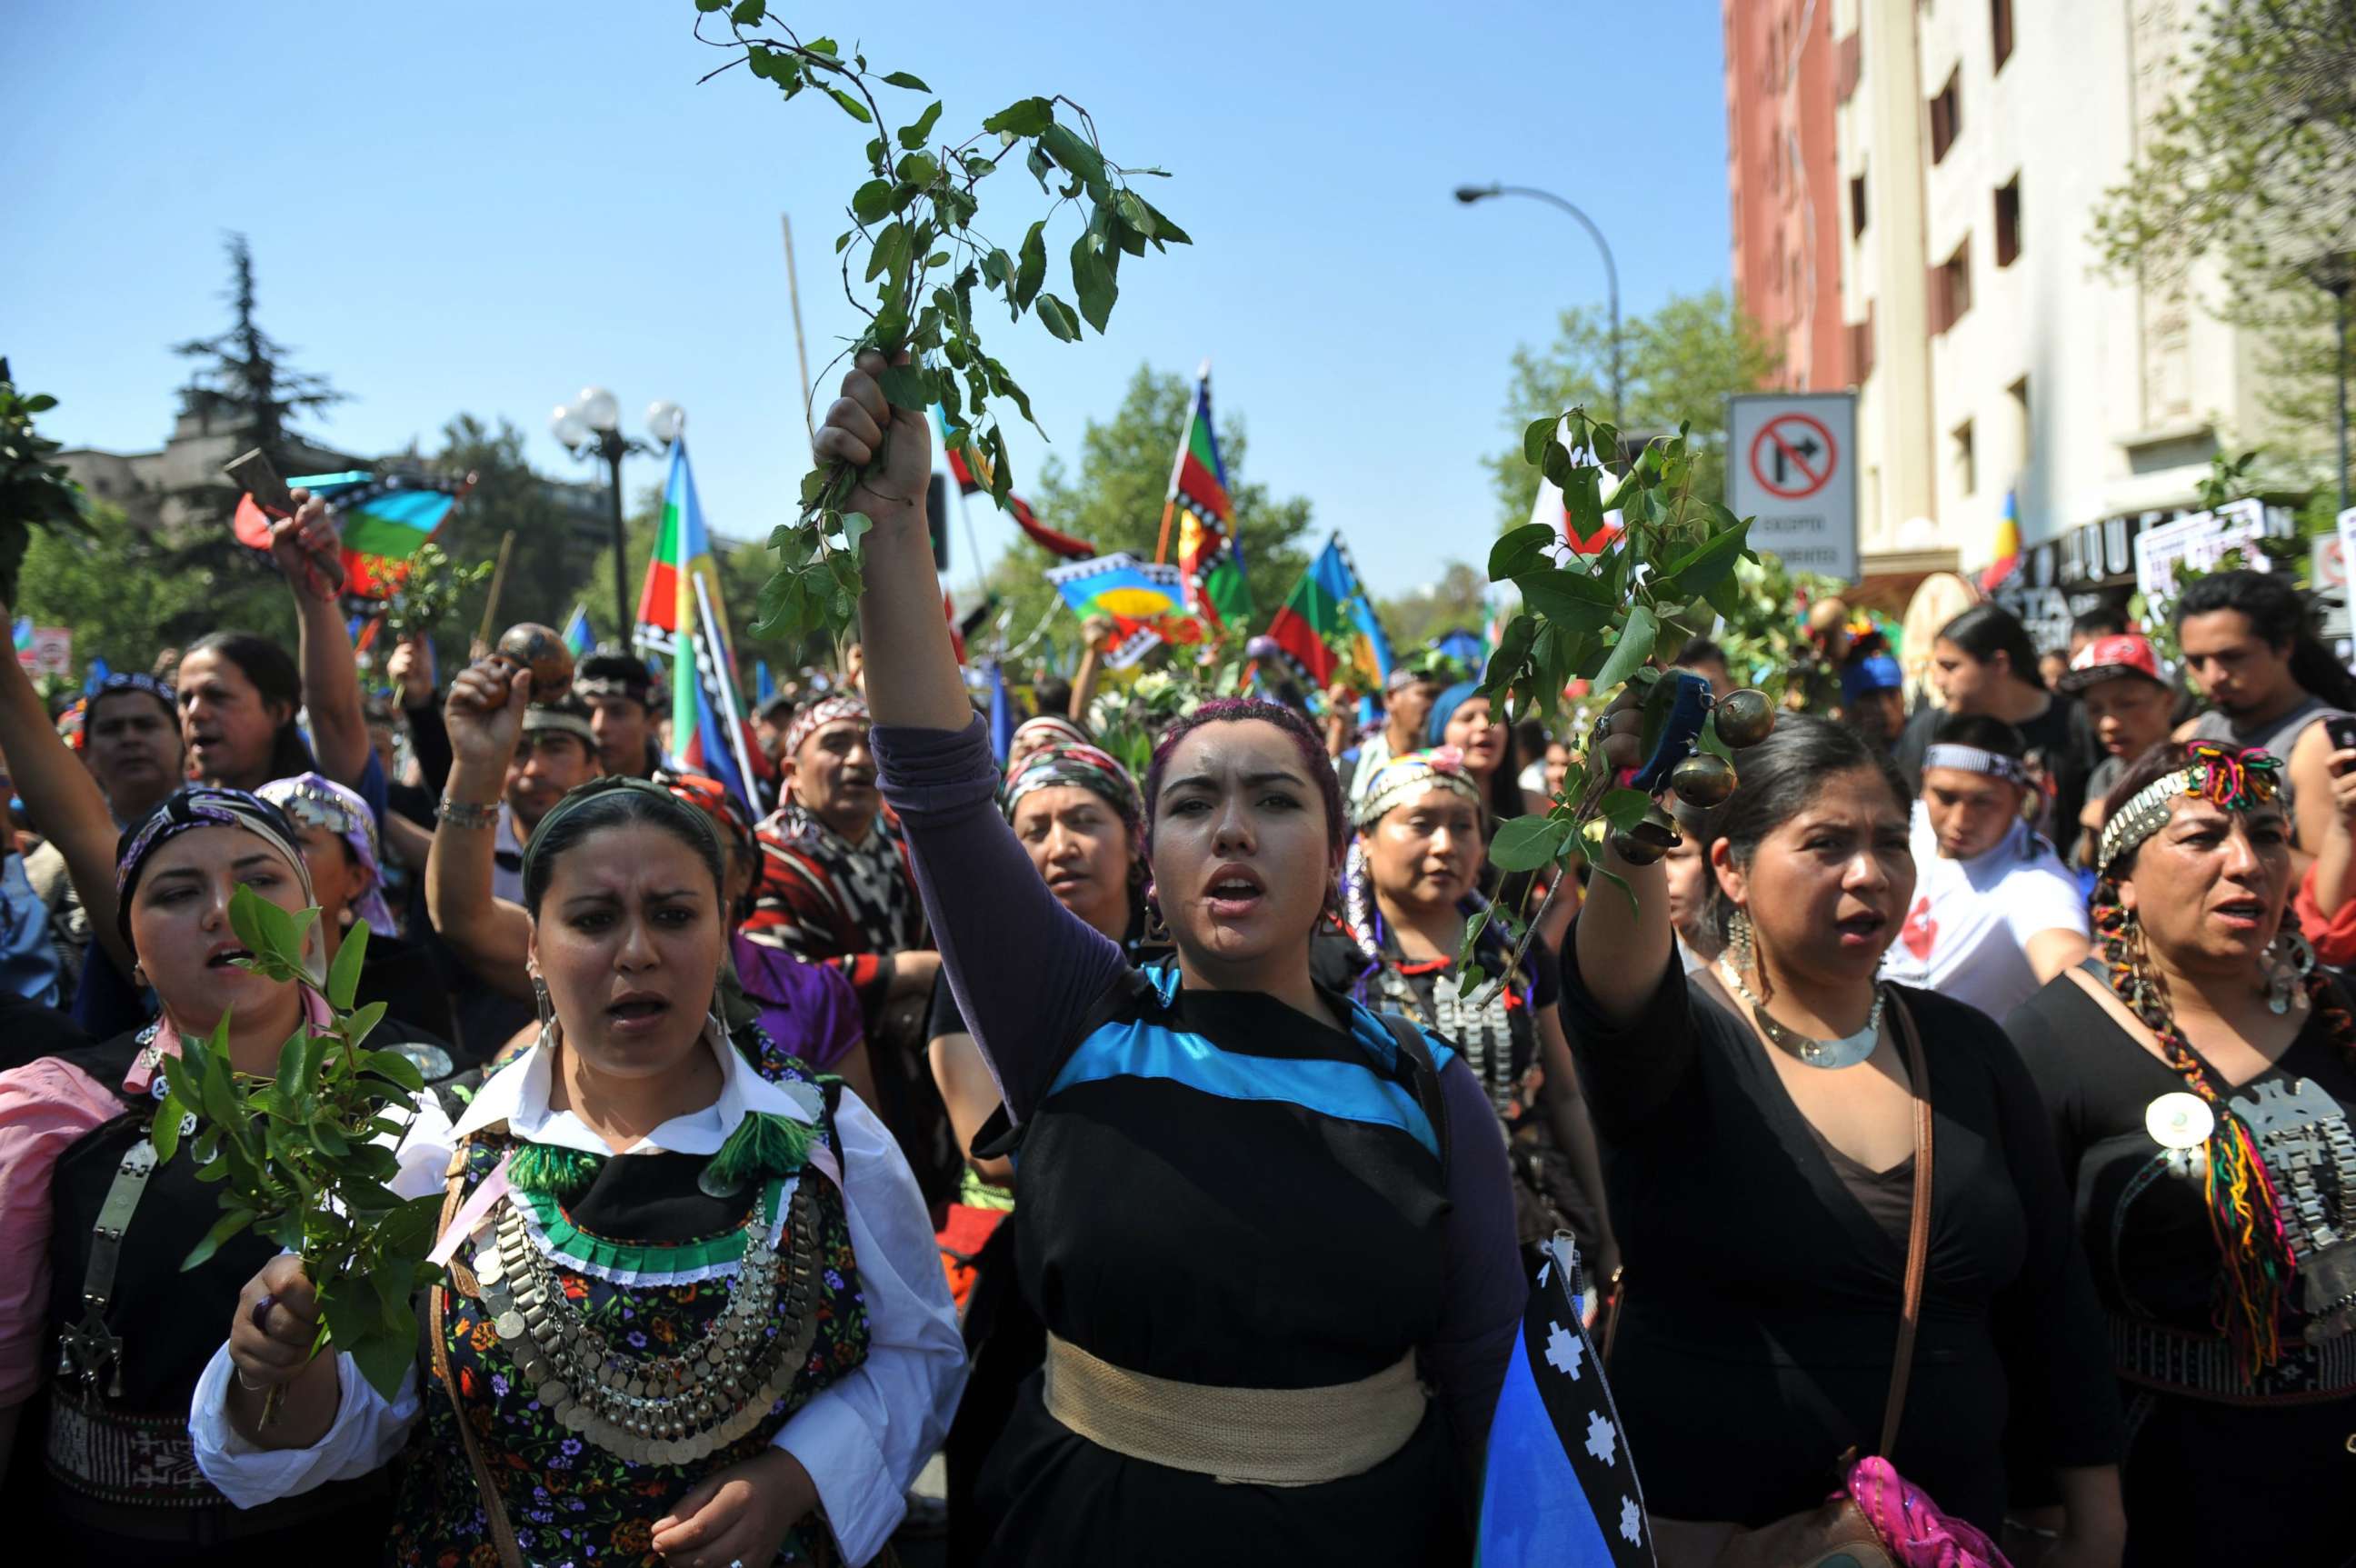 PHOTO: Mapuche indigenous people march in protest in downtown Santiago, on Oct. 12, 2013, during the commemorations for Columbus Day.